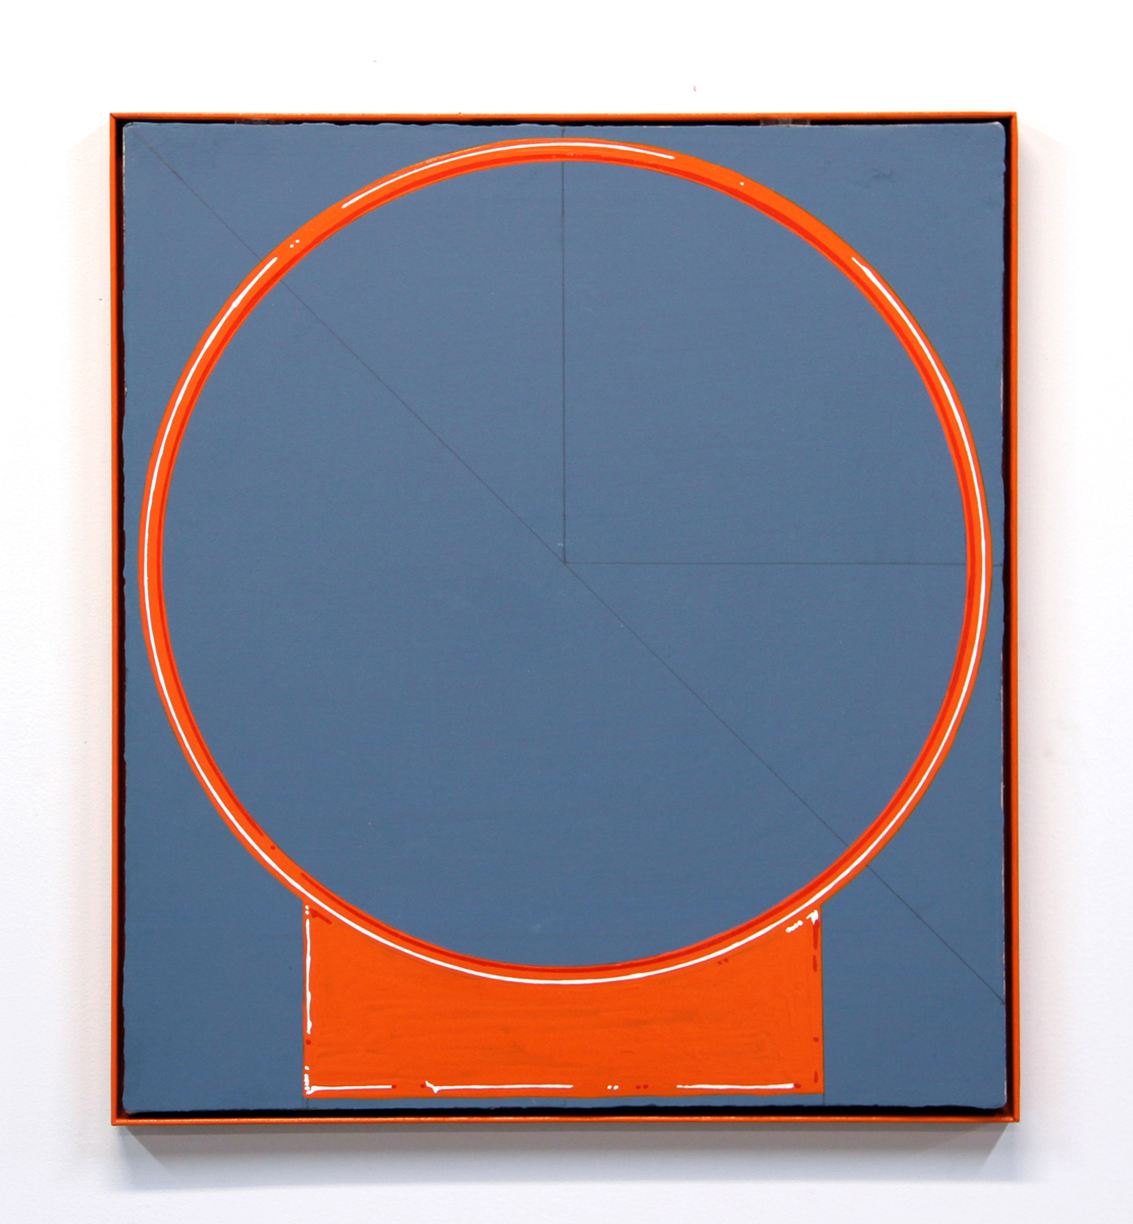 Practice Makes Perfect, 2016, enamel, gesso on canvas, powder-coated steel, 19.5 x 17.5 inches